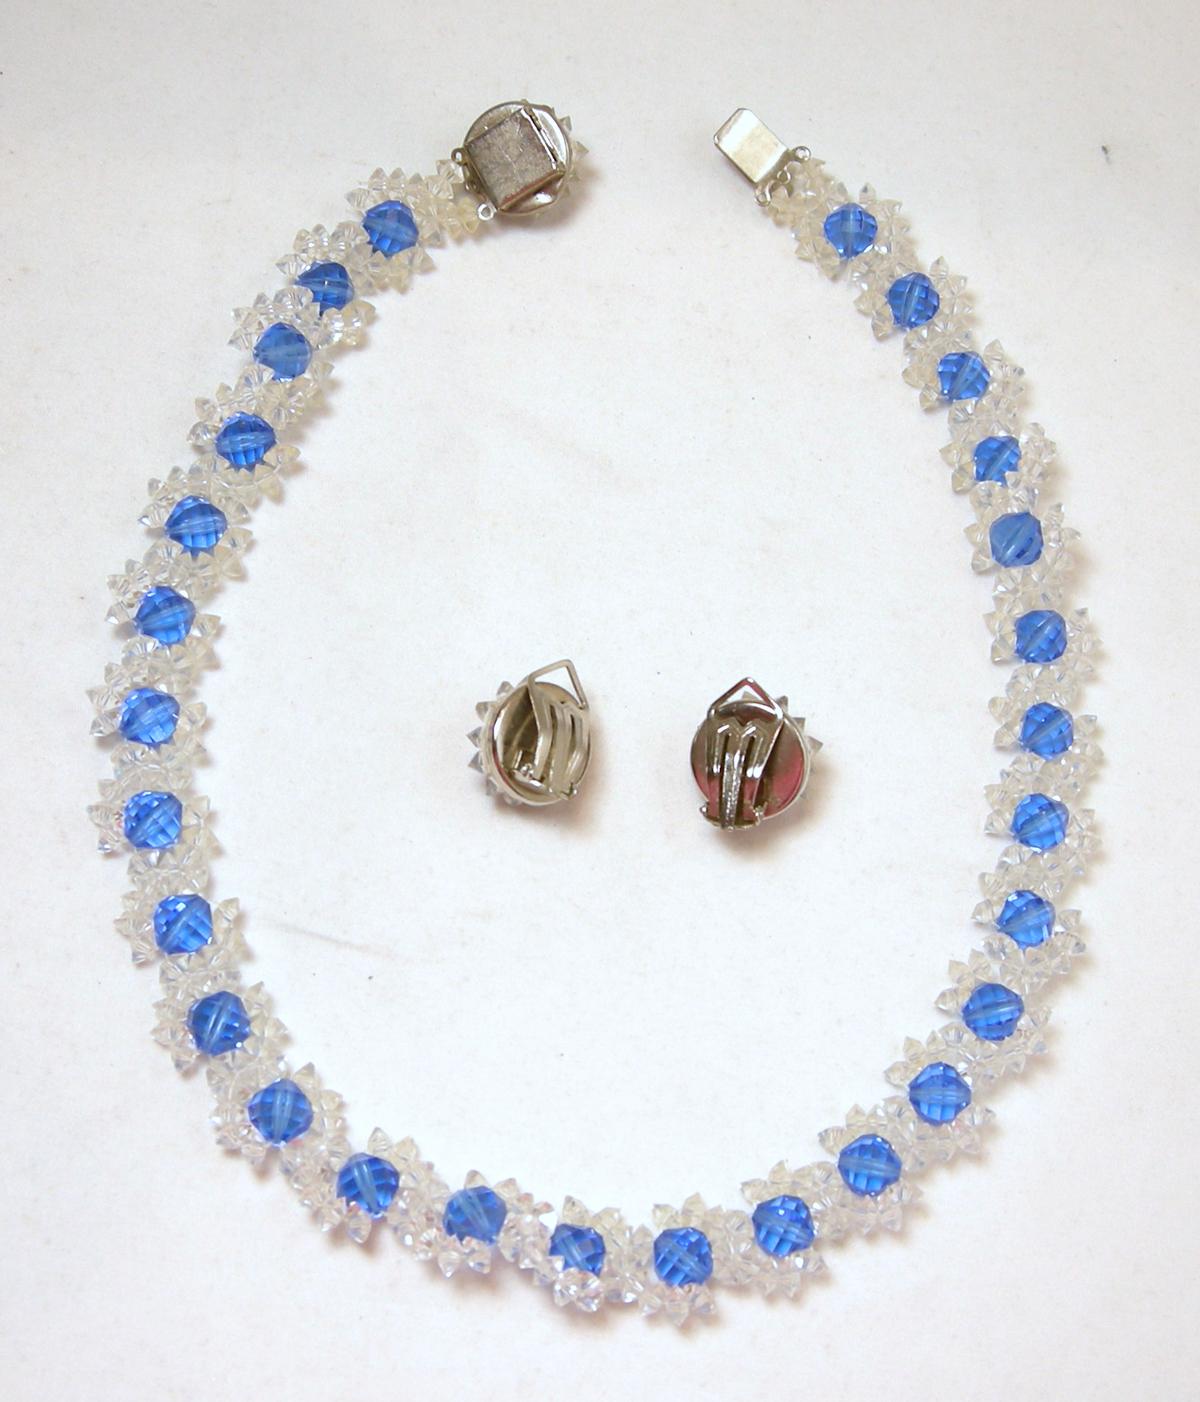 Women's or Men's Vintage 1940s Blue & Clear Glass Floral Necklace & Earrings For Sale